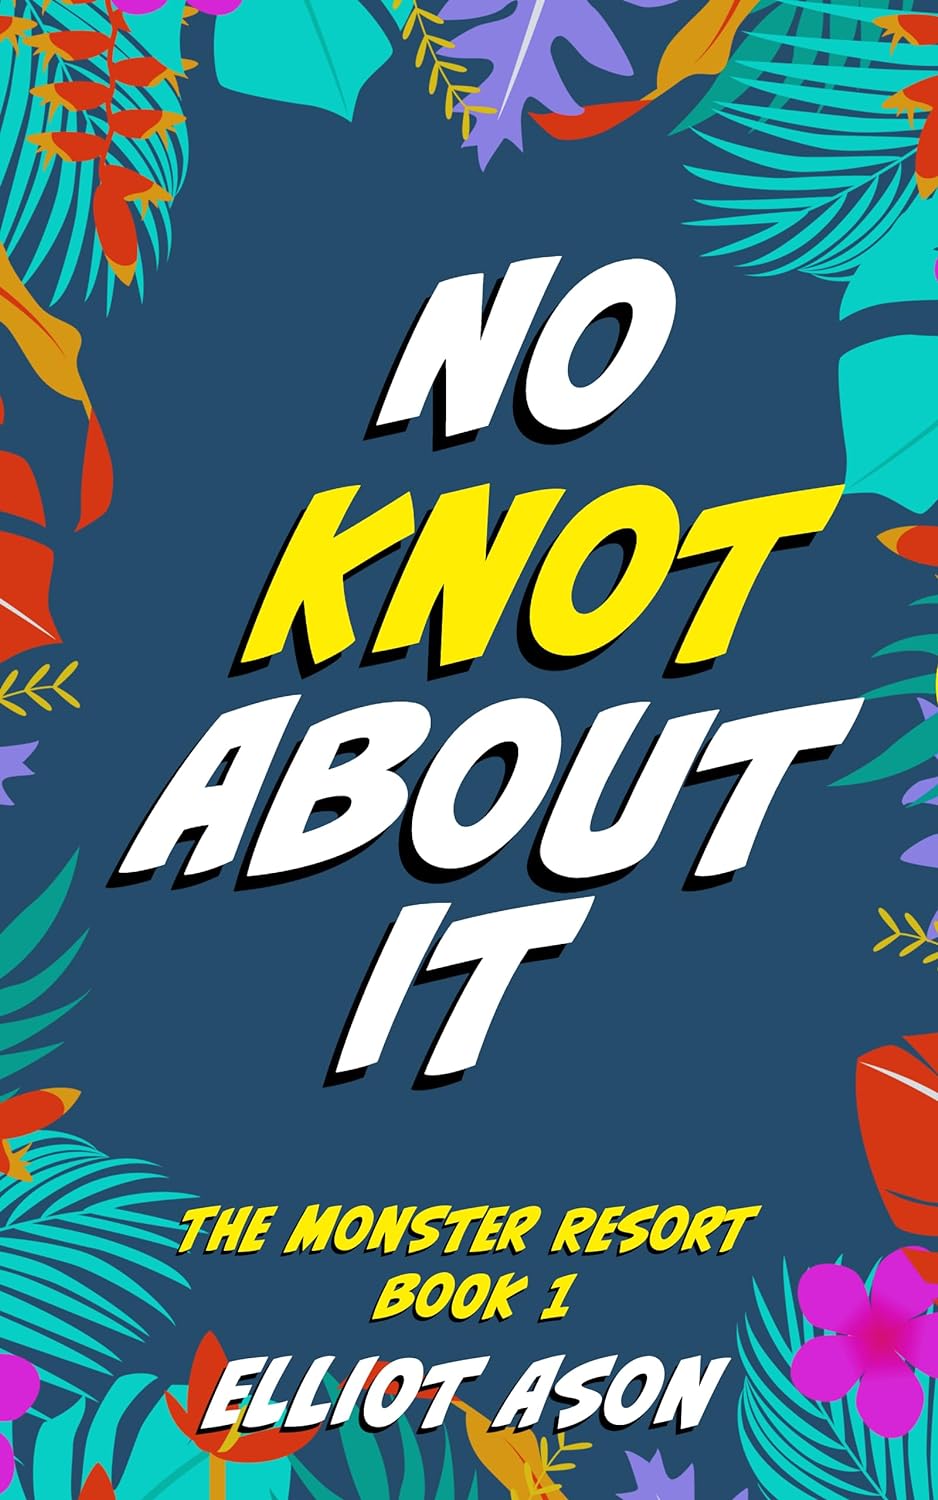 No Knot About It by Elliot Ason